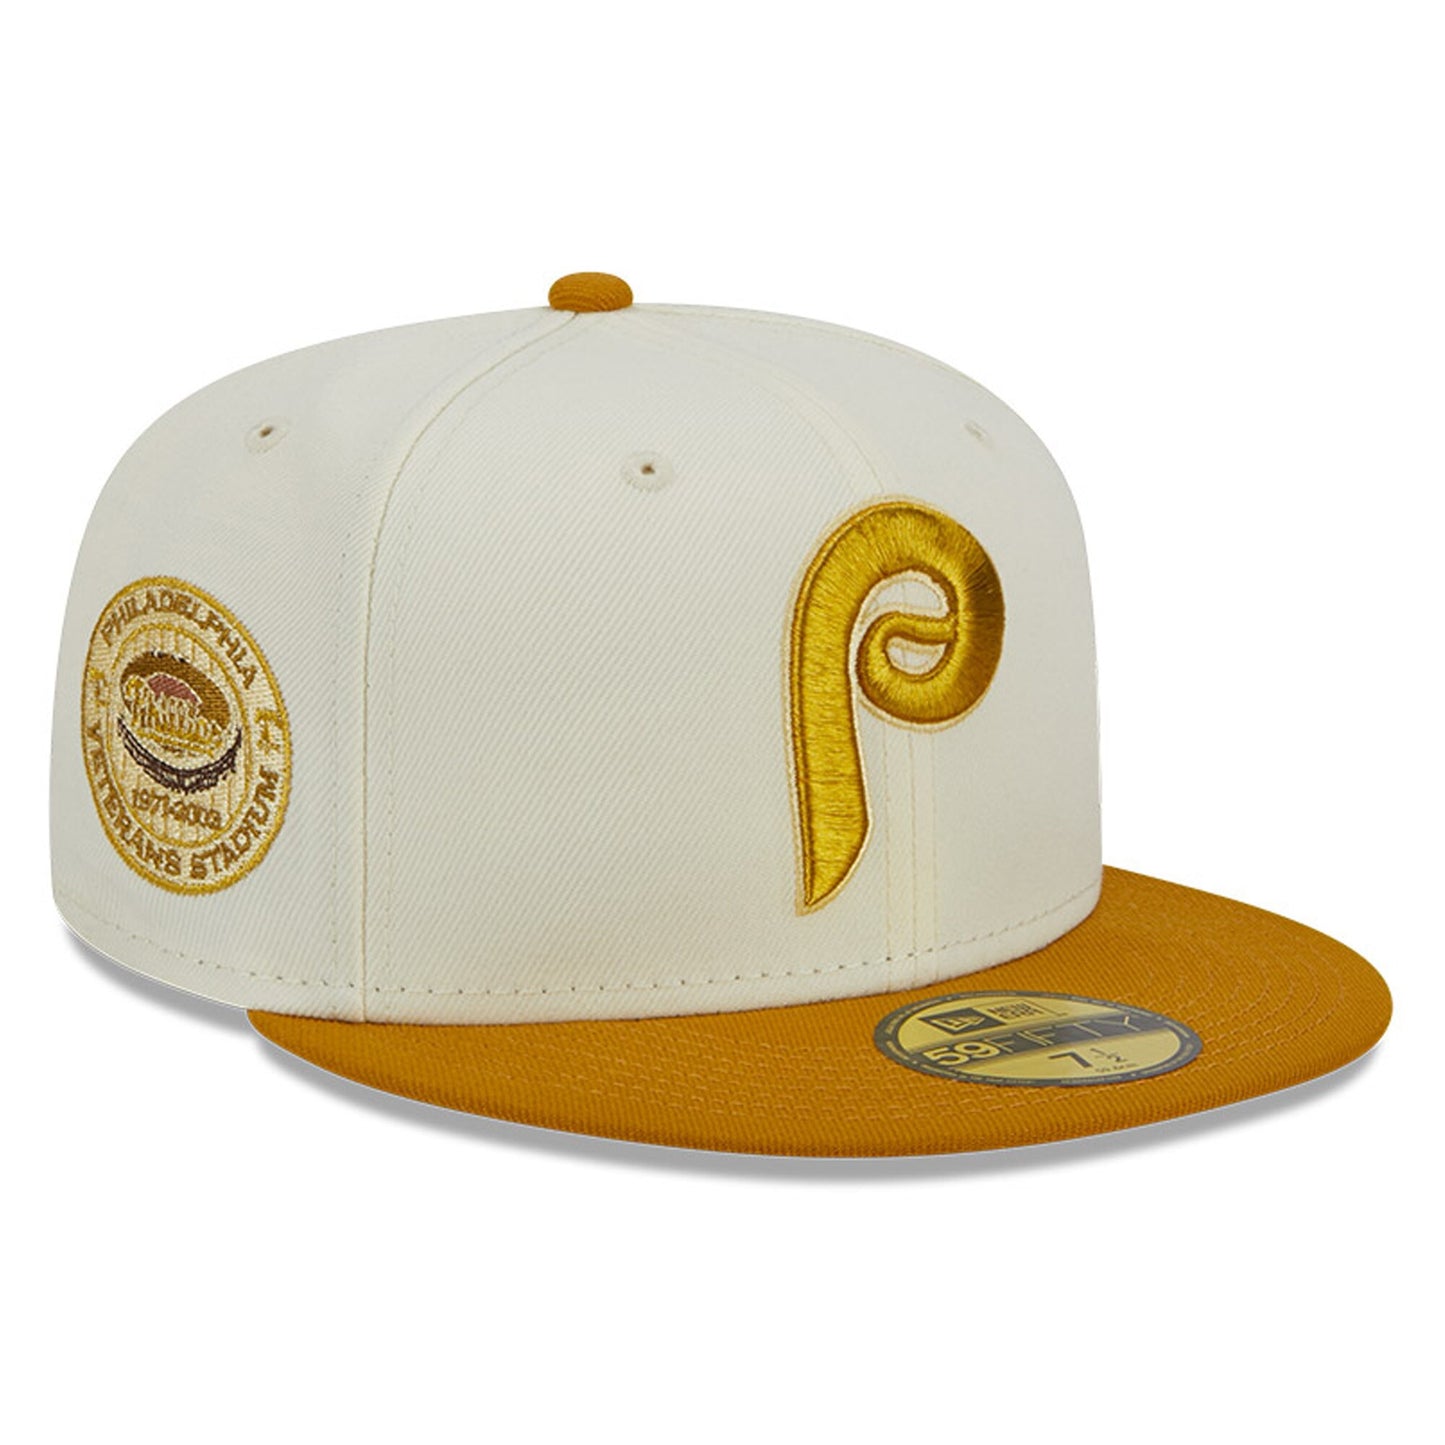 Philadelphia Phillies New Era City Icon 59FIFTY Fitted Hat - White